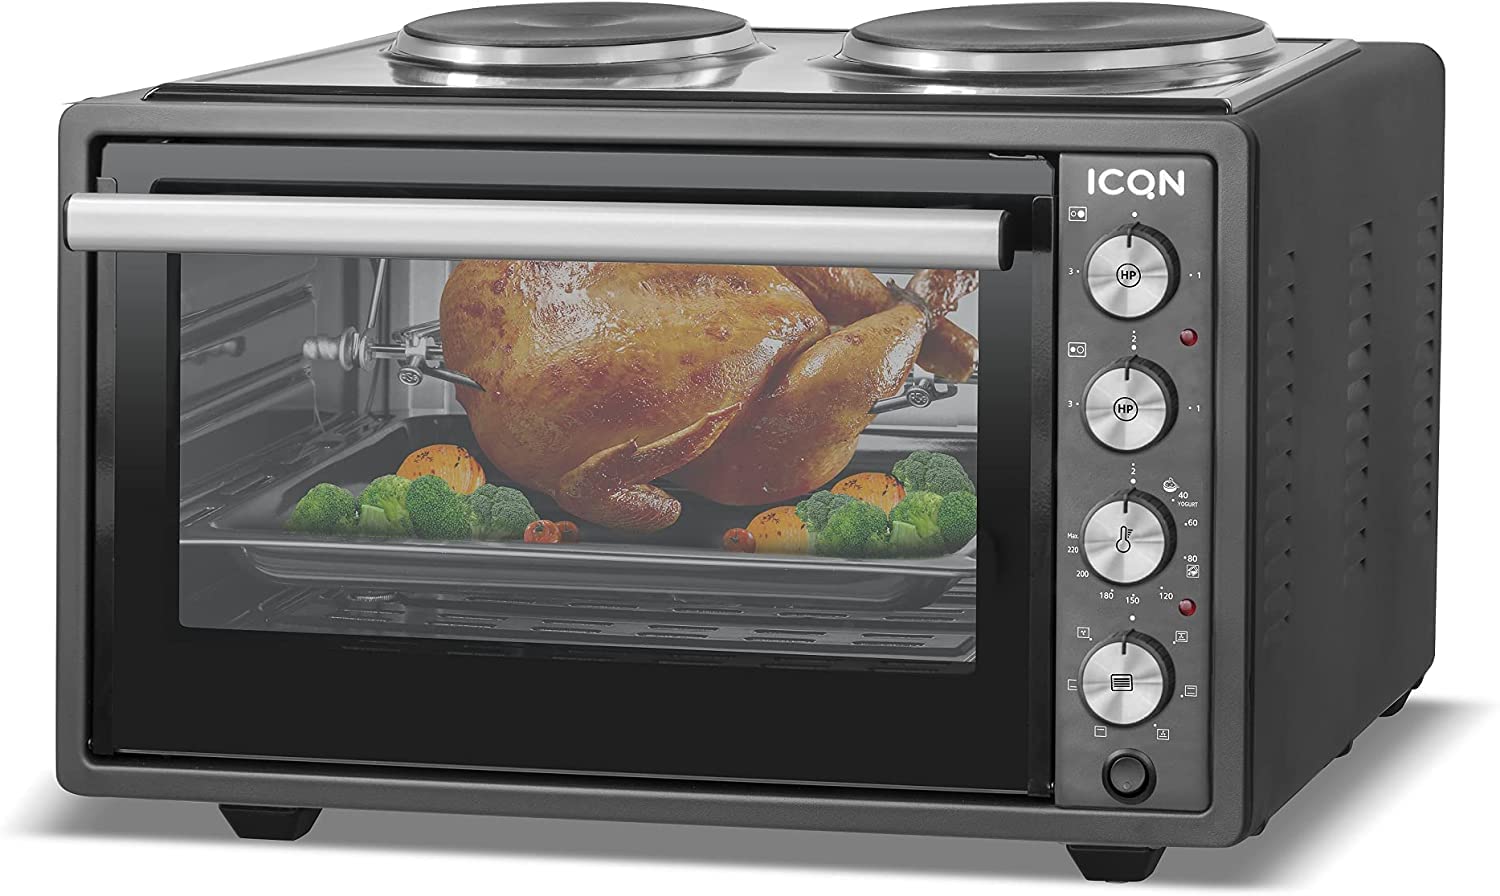 Icqn Mini Fan Oven, Pizza Oven, Mini Oven, Interior Lighting, Double Glazing, Timer Function, Enamelled, charcoal